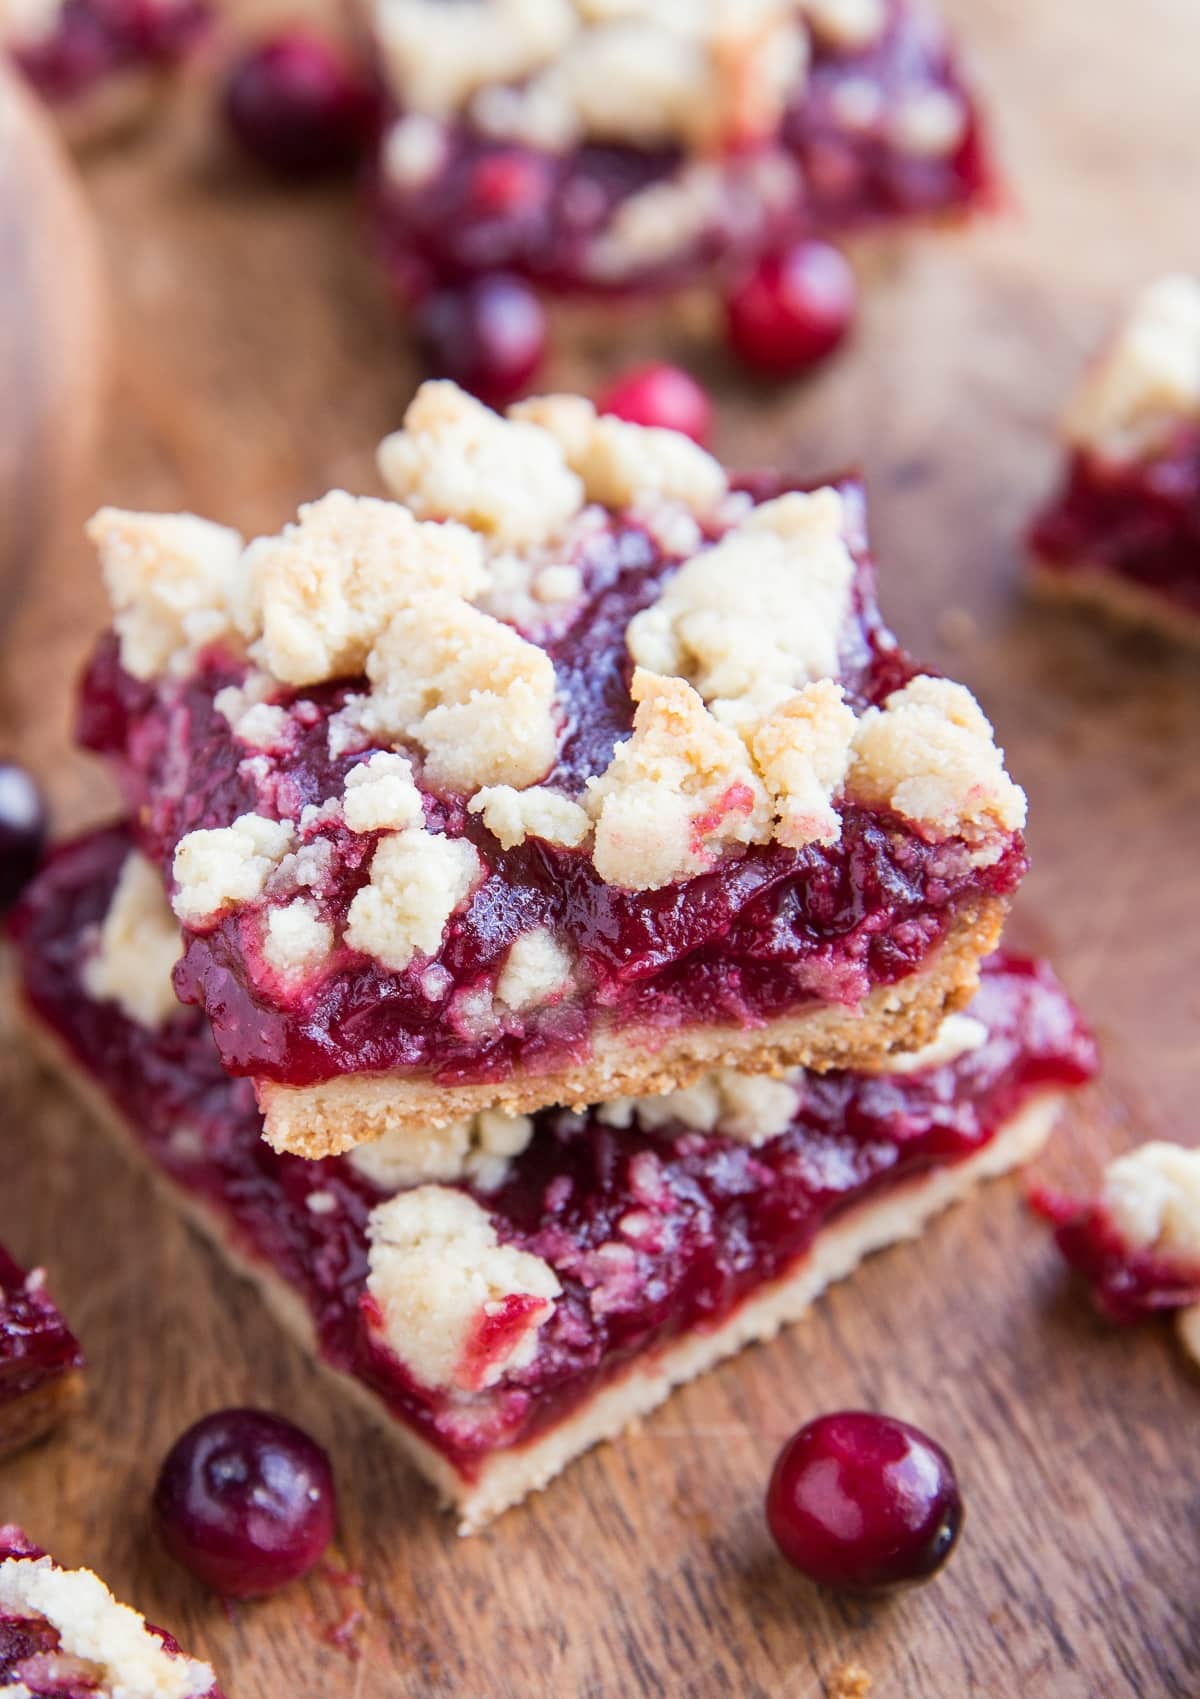 Vegan Paleo Cranberry Crumb Bars can be made using leftover cranberry sauce. Recipe includes instructions for making bars without leftover cranberry sauce too. Grain-free, dairy-free, and healthy!